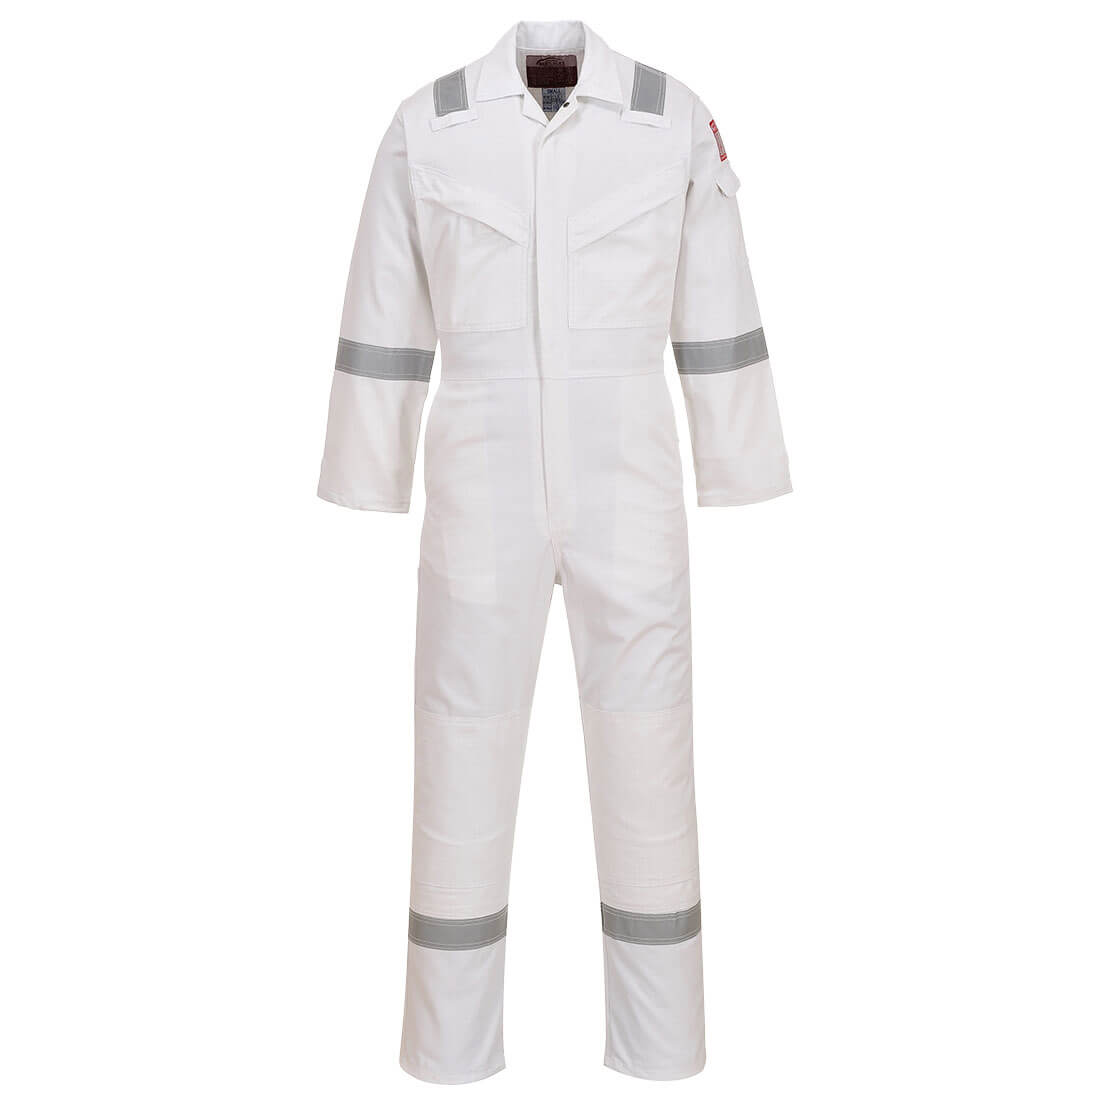 Image of Biz Flame Mens Aberdeen Flame Resistant Antistatic Coverall White M 32"